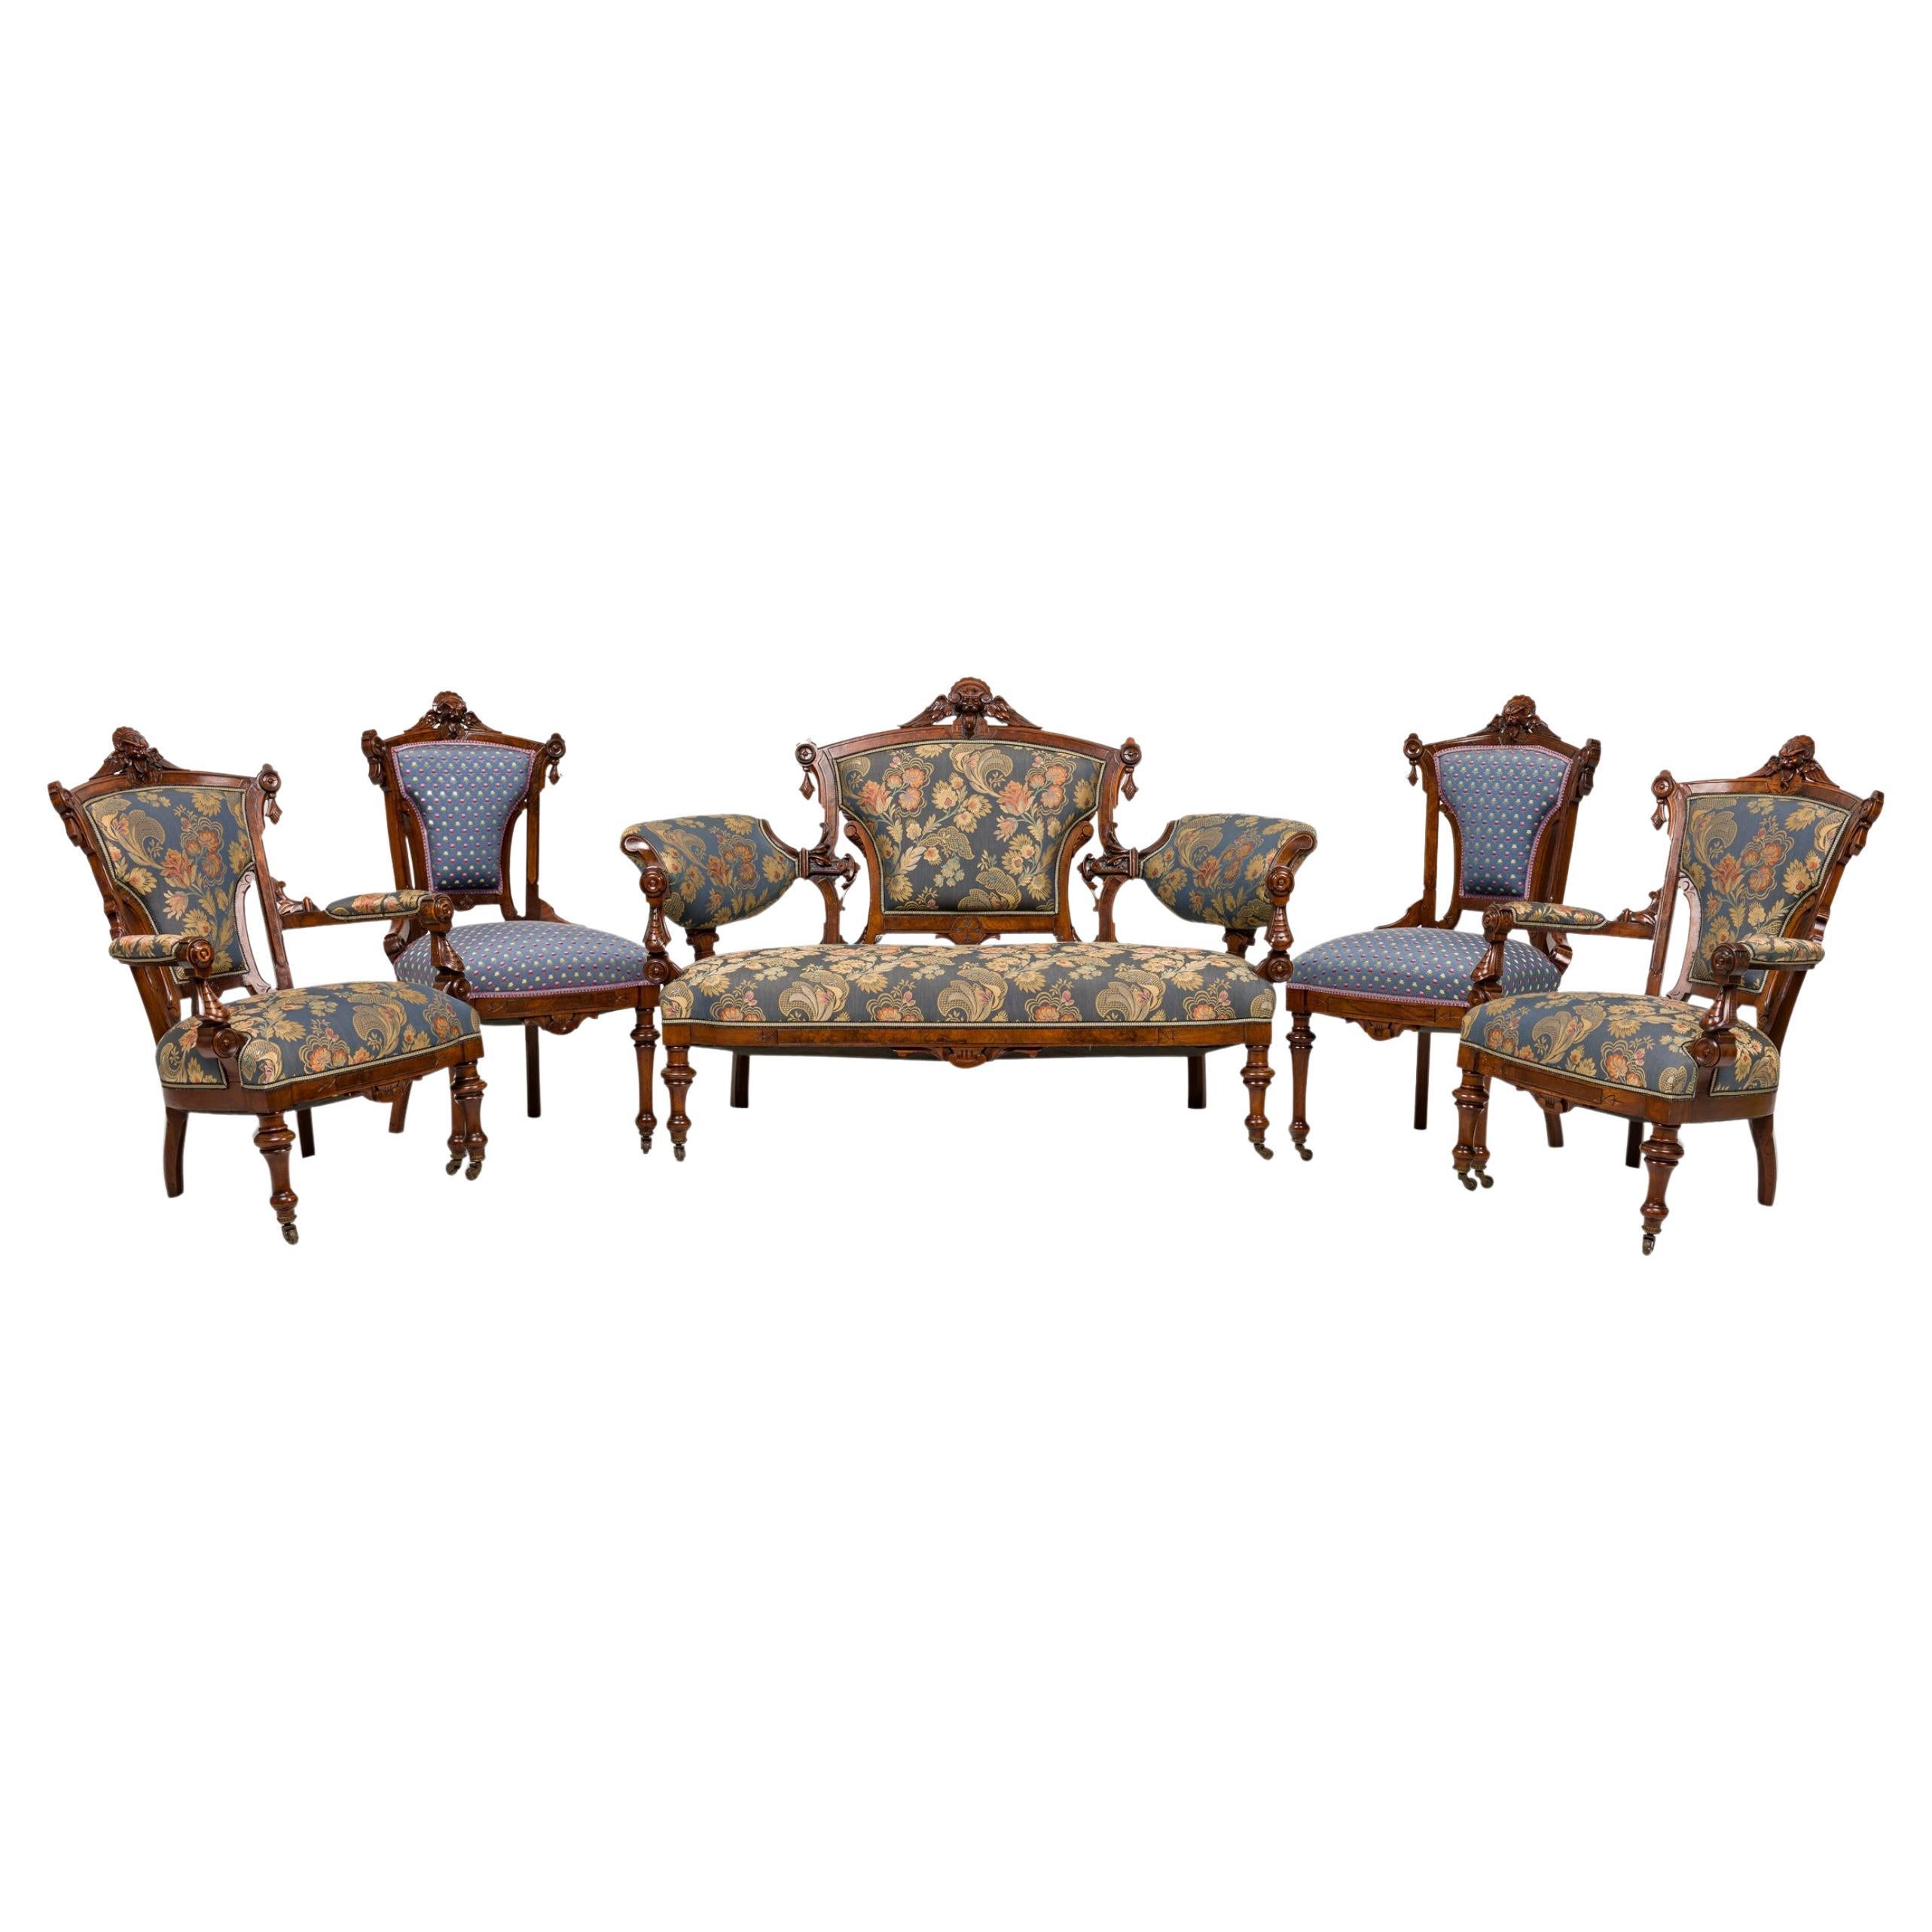 7 Piece American Victorian Upholstered Carved Mahogany Living Room Set